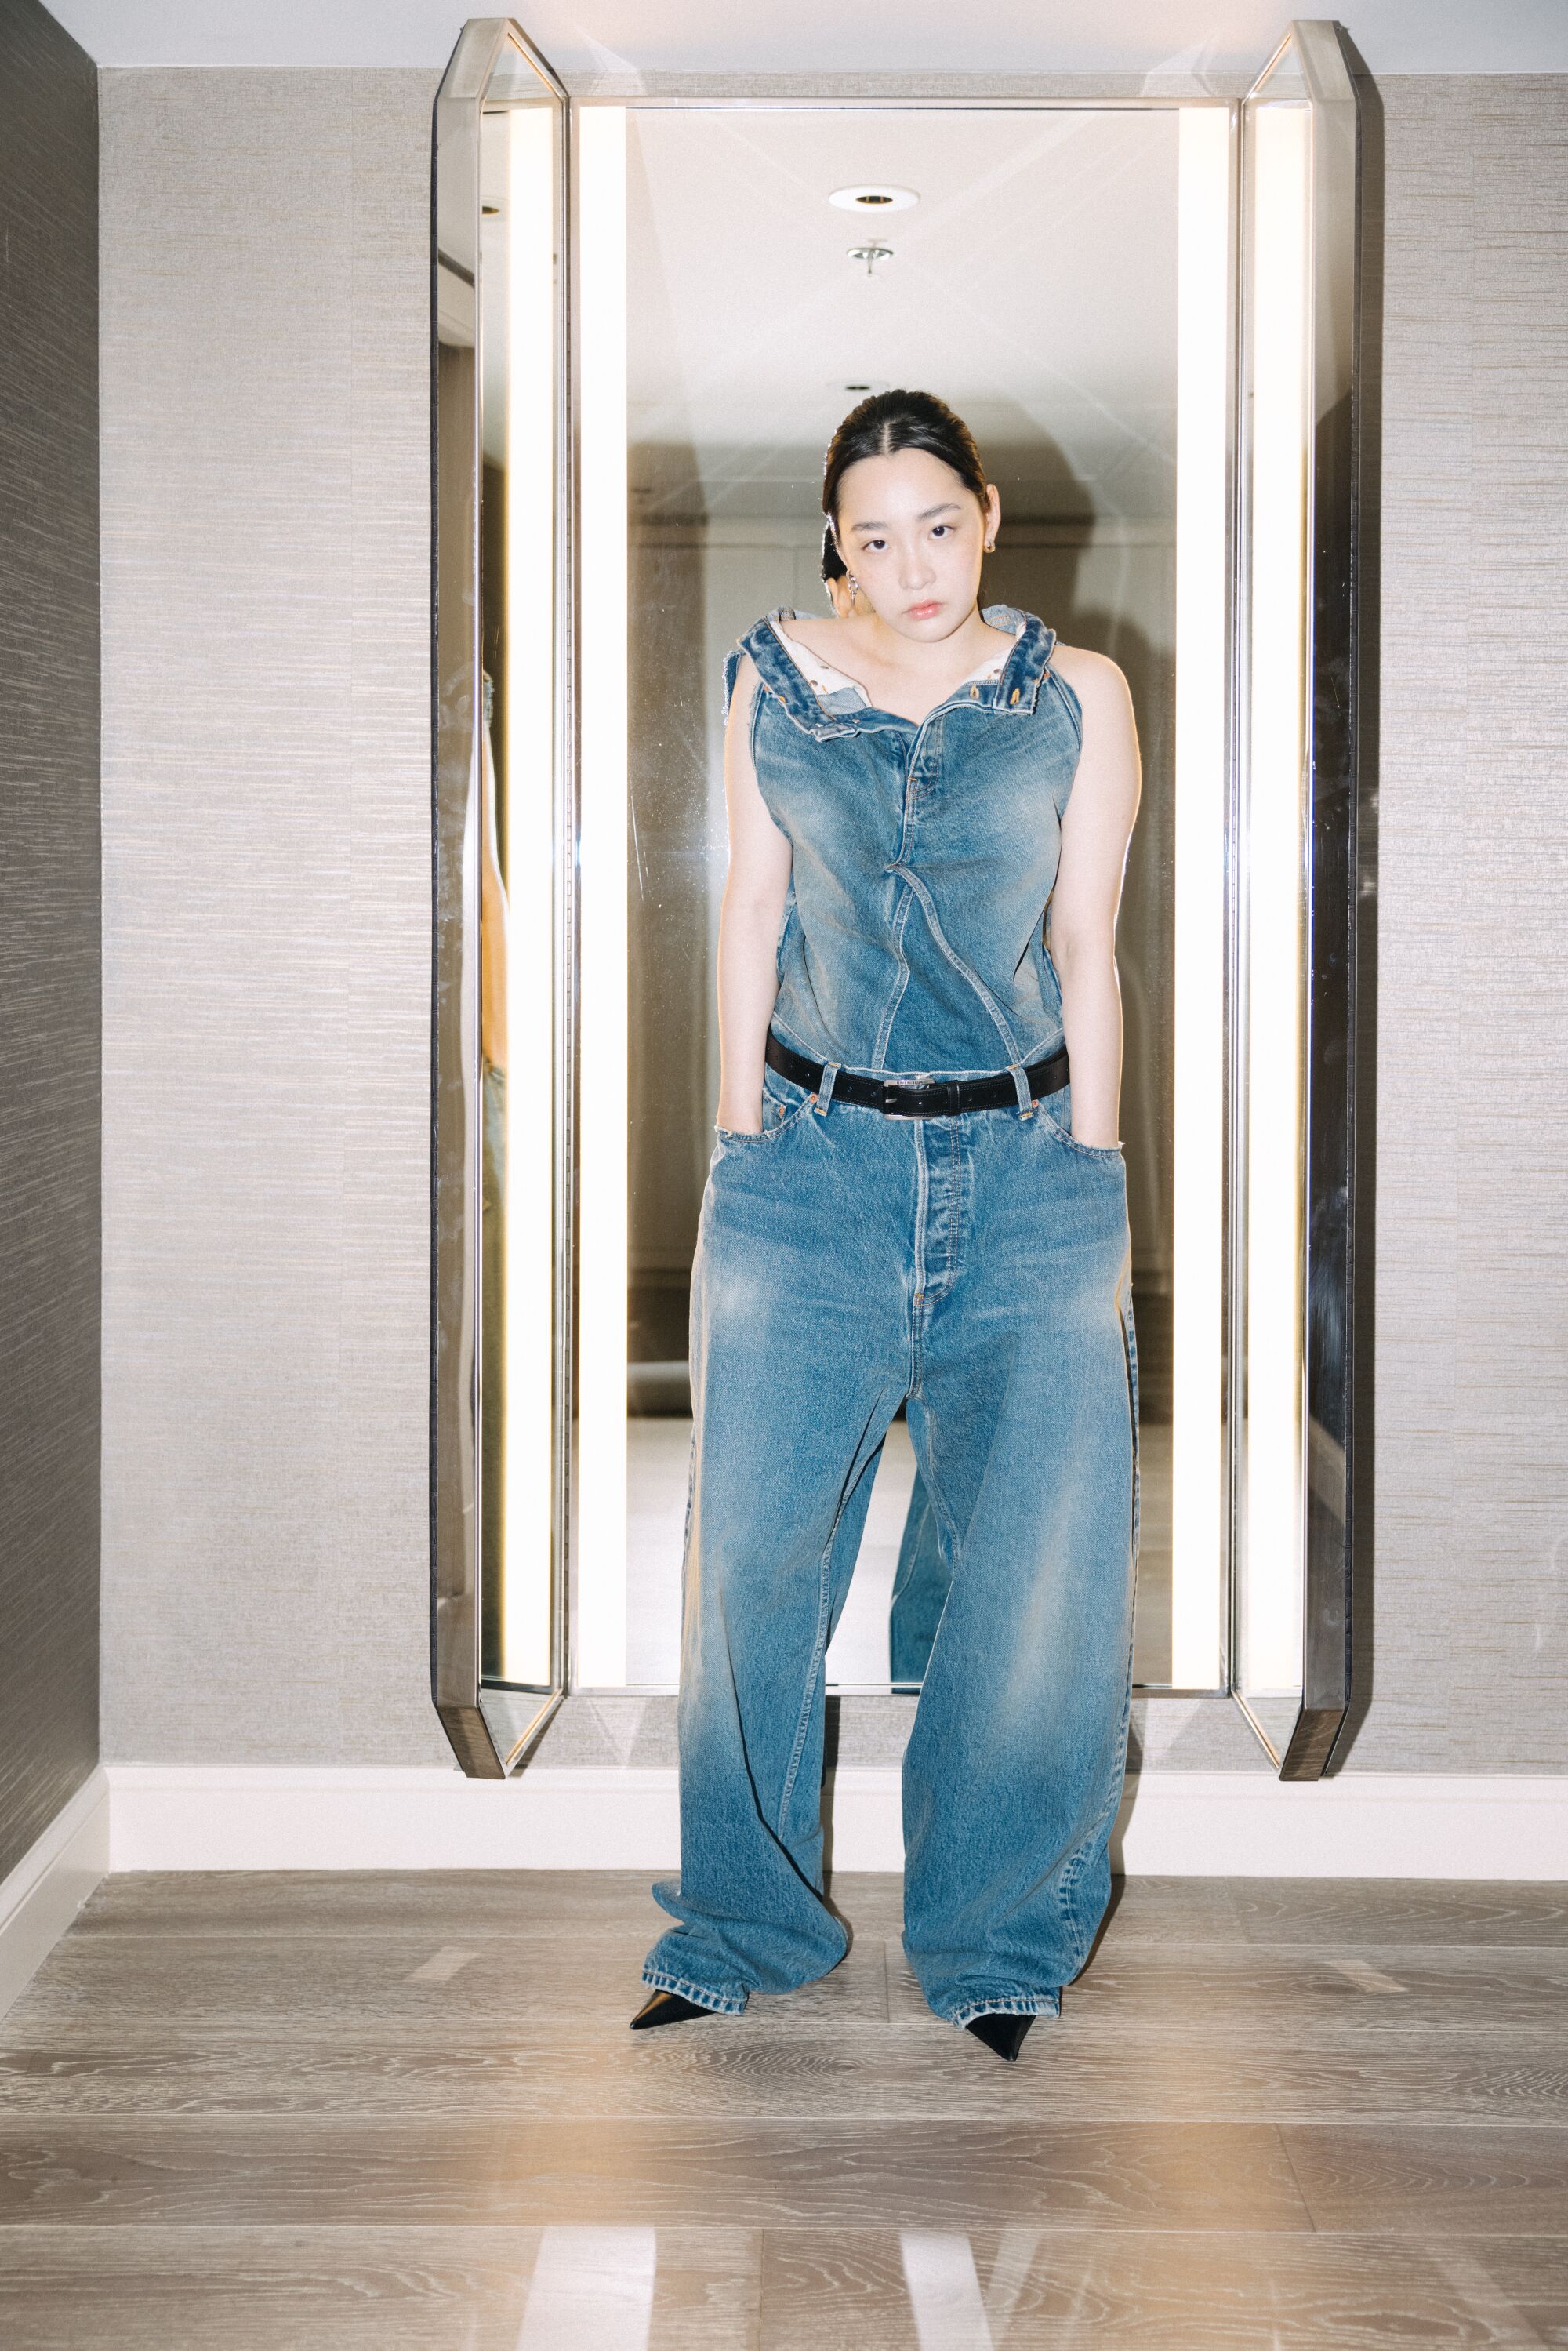 A woman in a faded denim outfit poses for a photo against a wall mirror.